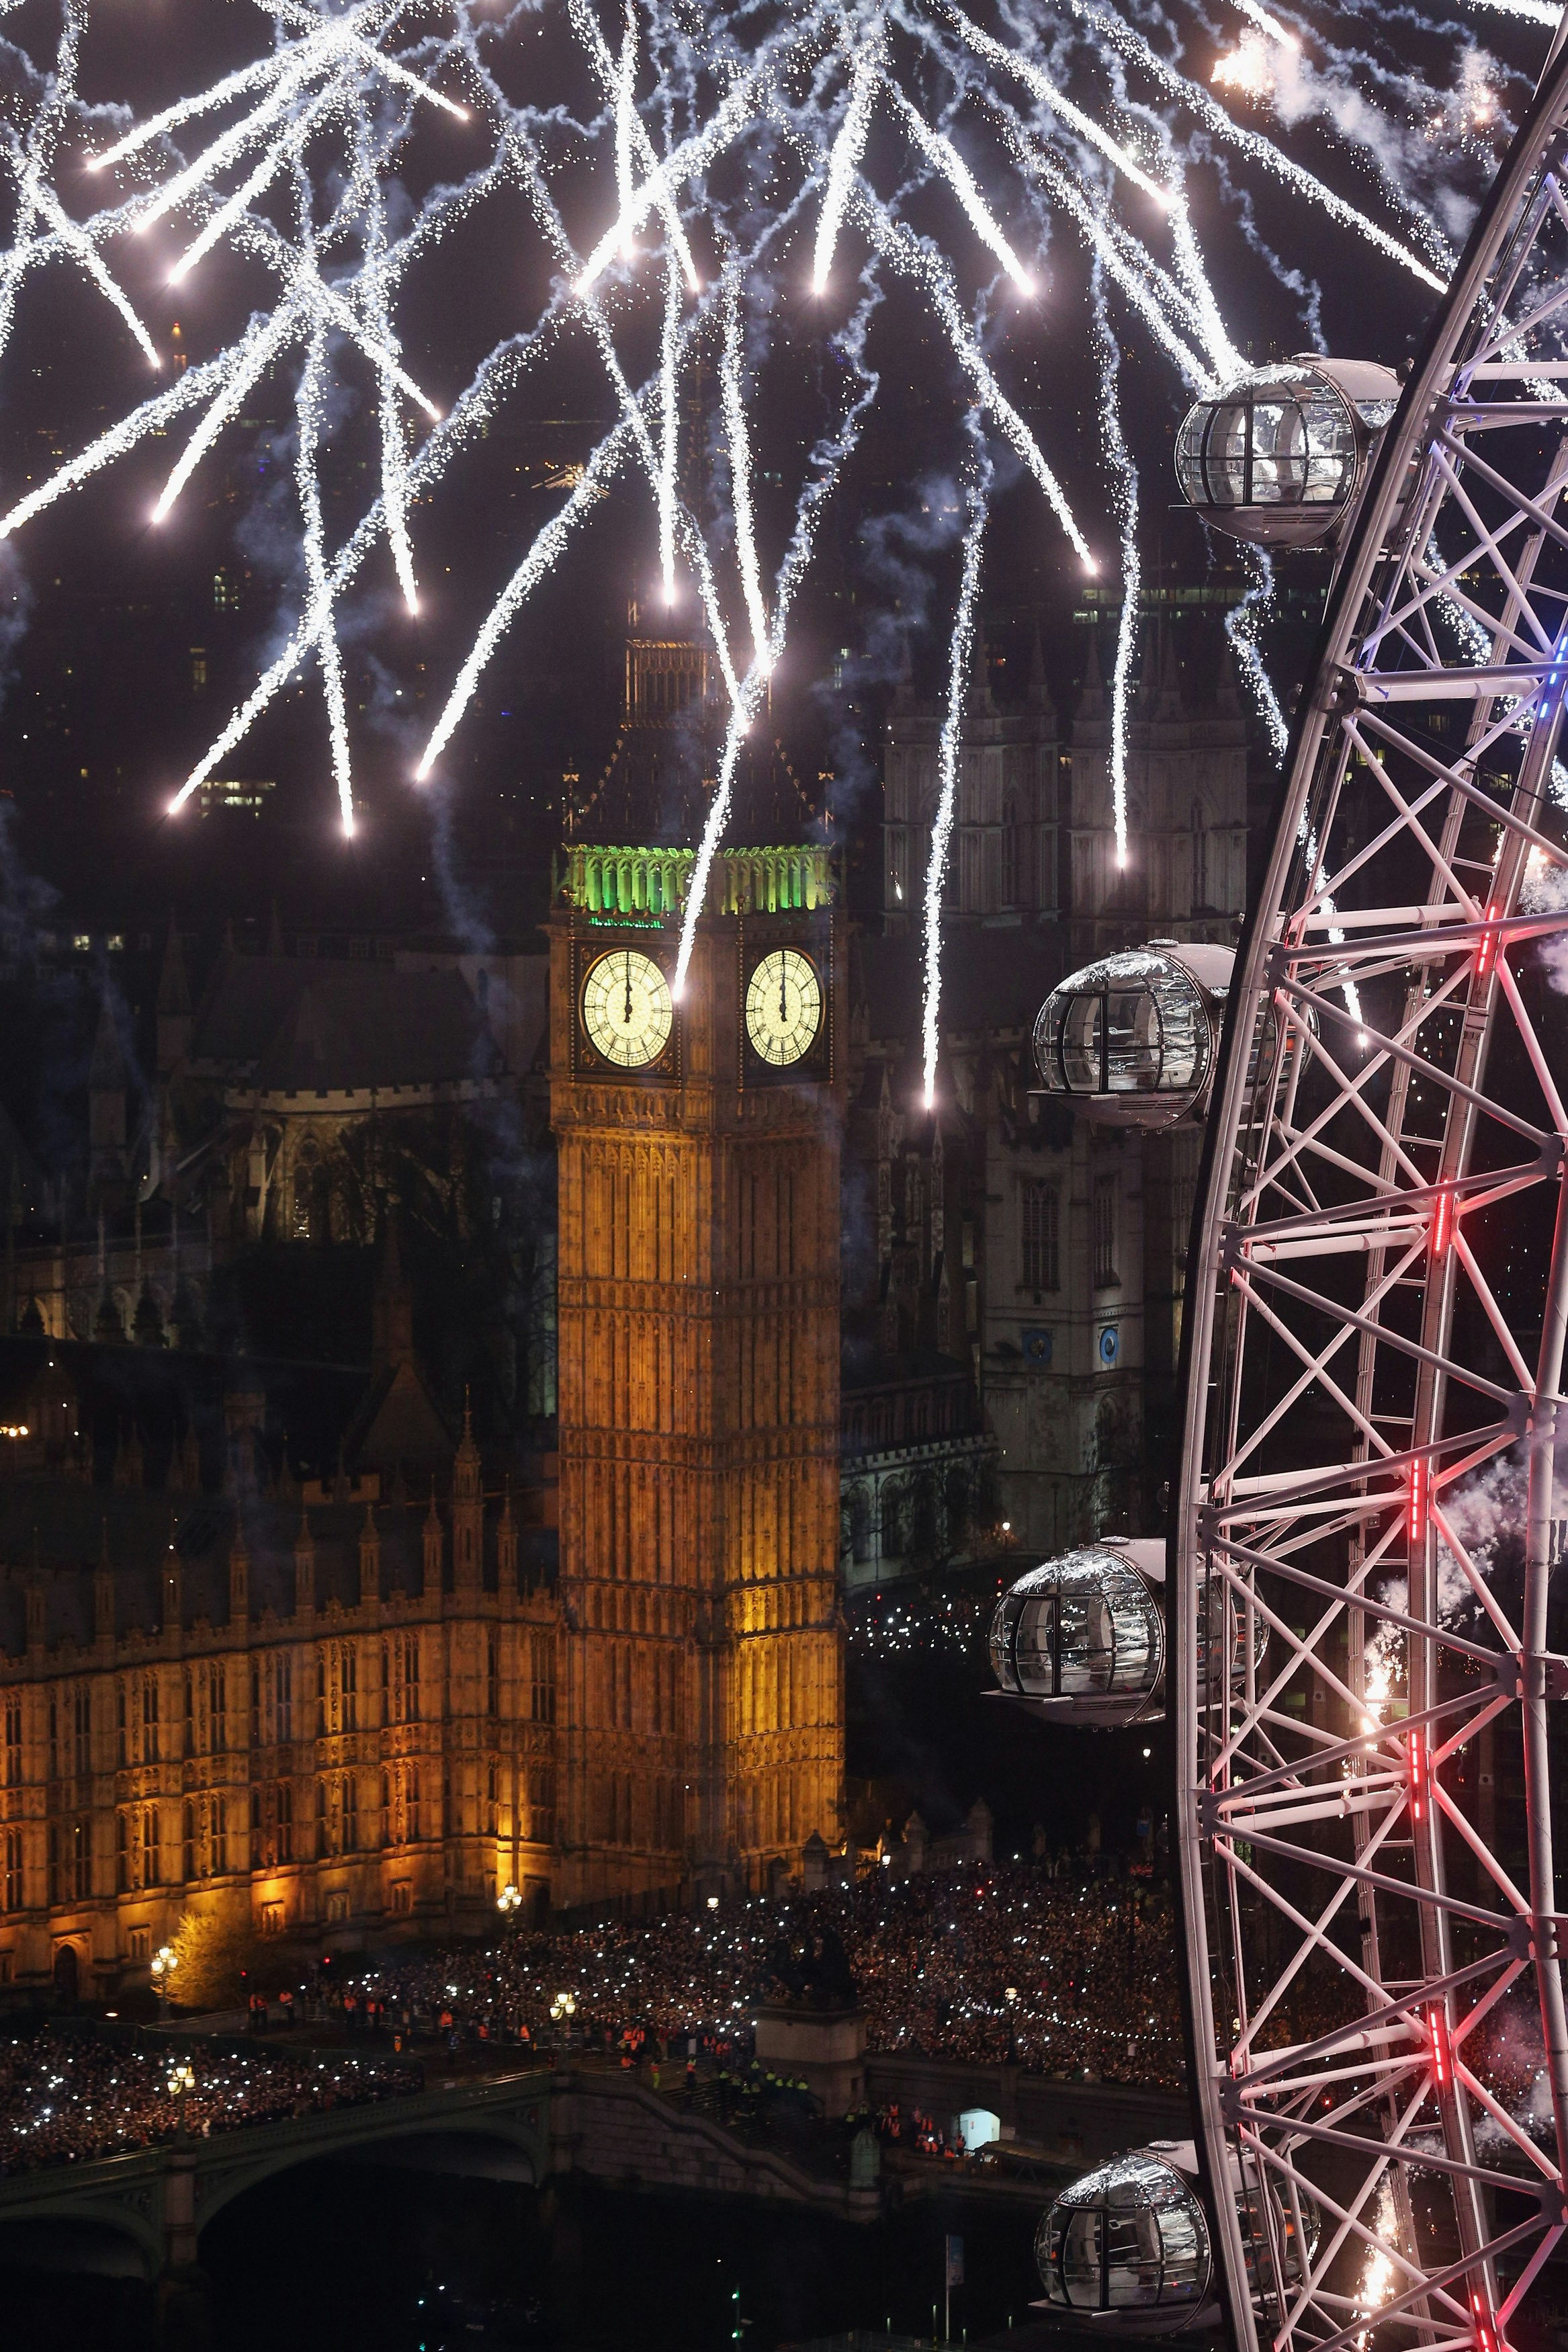 Aerial view of the New Year's Eve street party in London beside the Palace of Westminster. Part of the London Eye can be seen in the near foreground, while fireworks rain down over Elizabeth Tower (Big Ben). Thousands of people are gathered in the streets below.